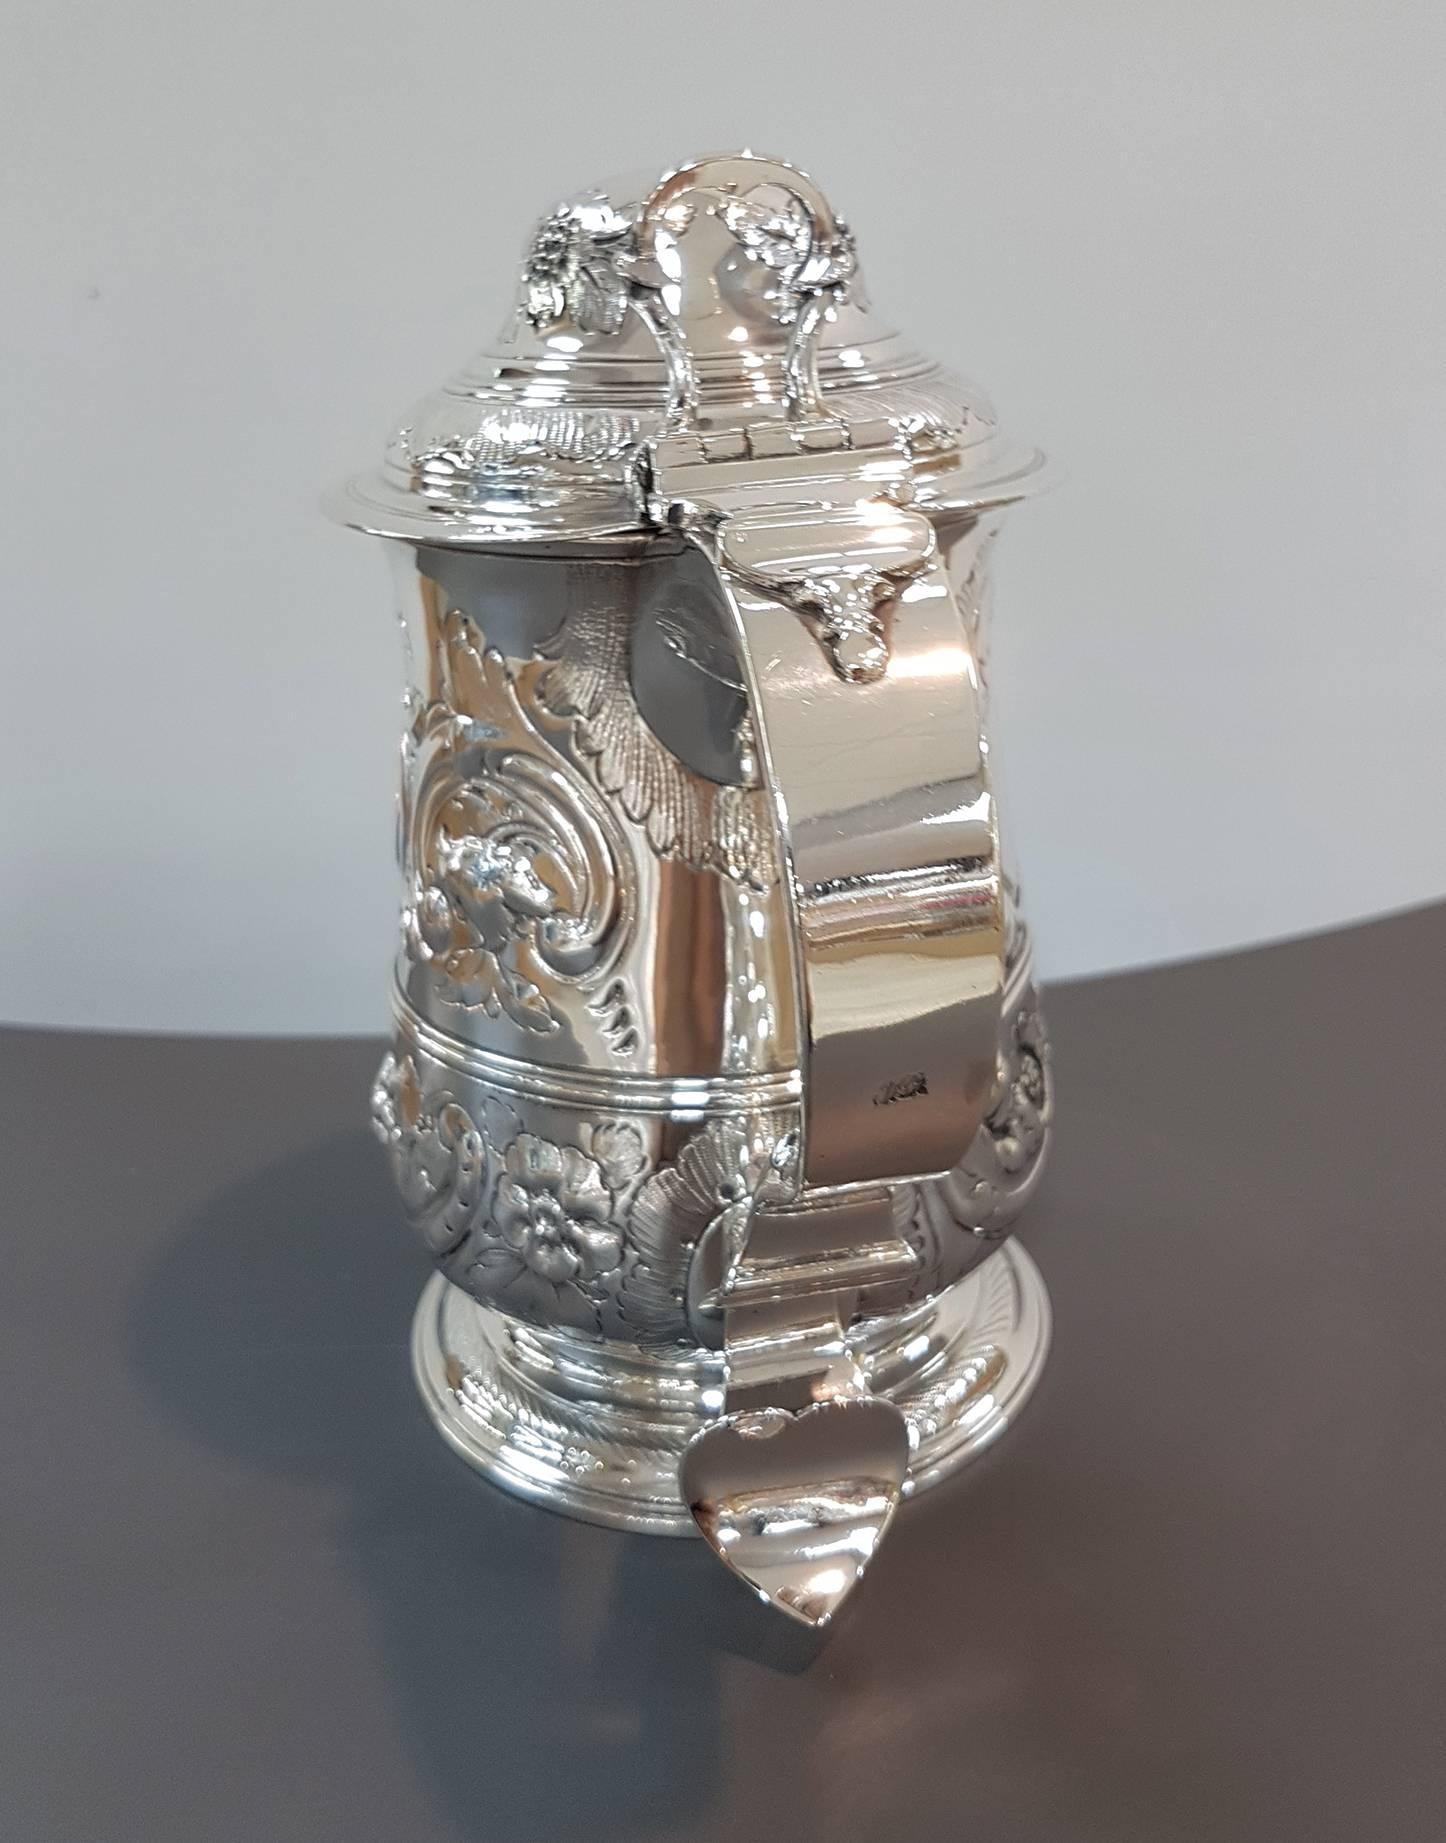 This is a wonderful antique English George III silver lidded tankard with hallmarks for London, 1765 and the makers mark of the renowned silversmiths John Payne.

The tankard has wonderful embossed floral decorations throughout with a blank